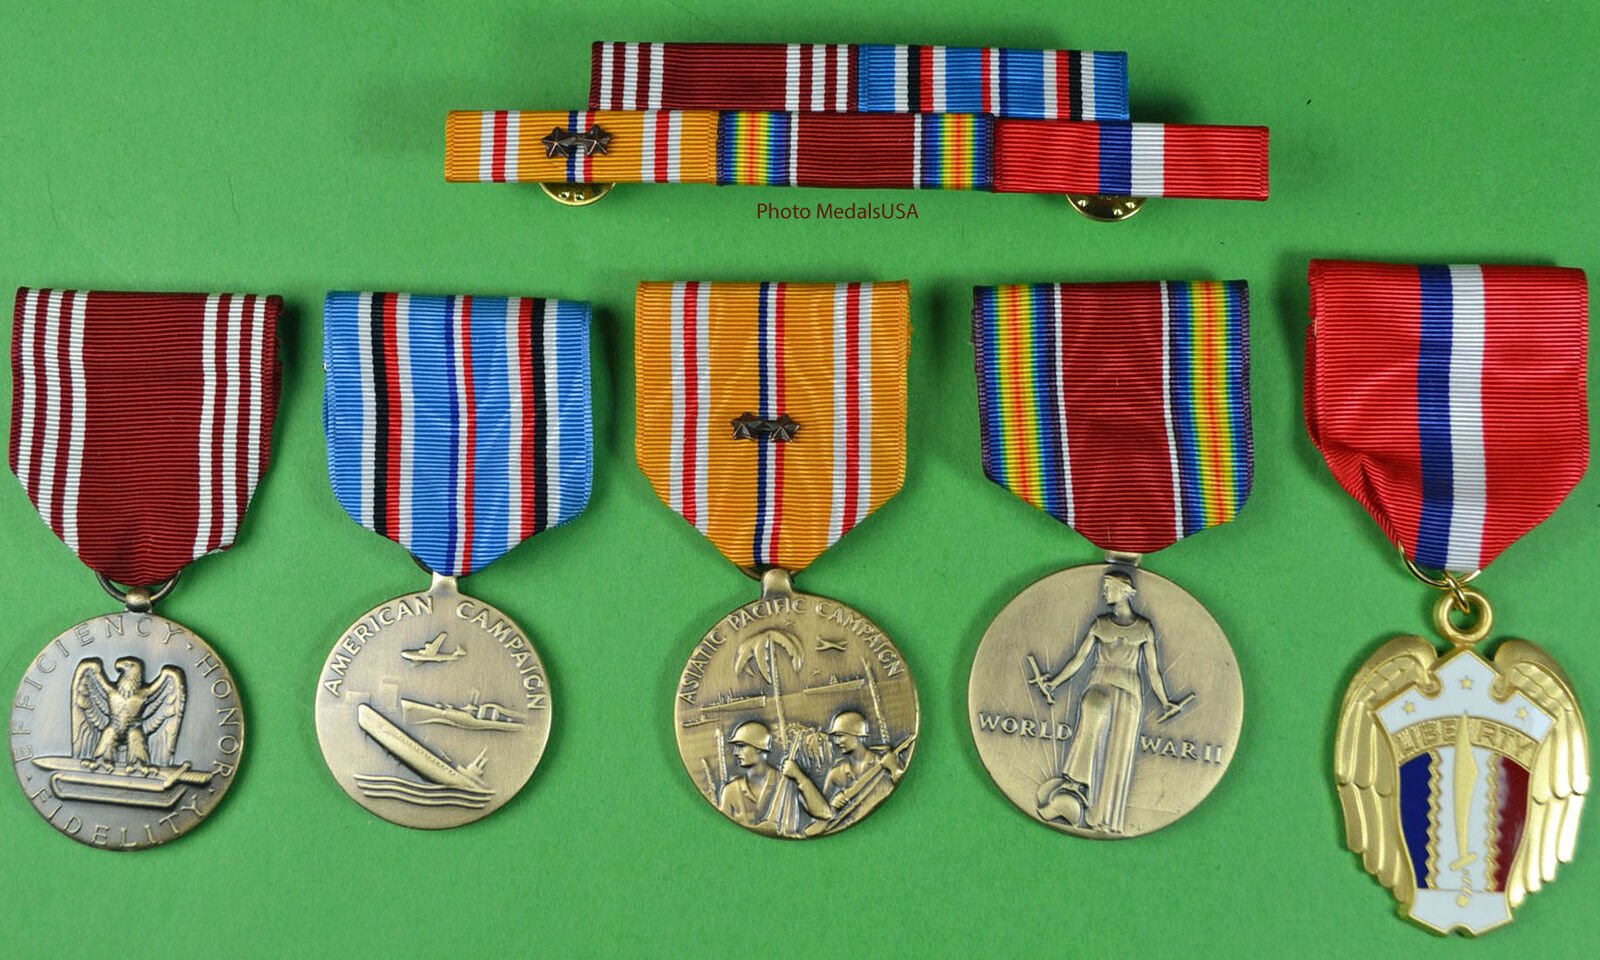 5 WWII Army Medals & Ribbon Bar for Service in the Pacific - Philippines WW2 